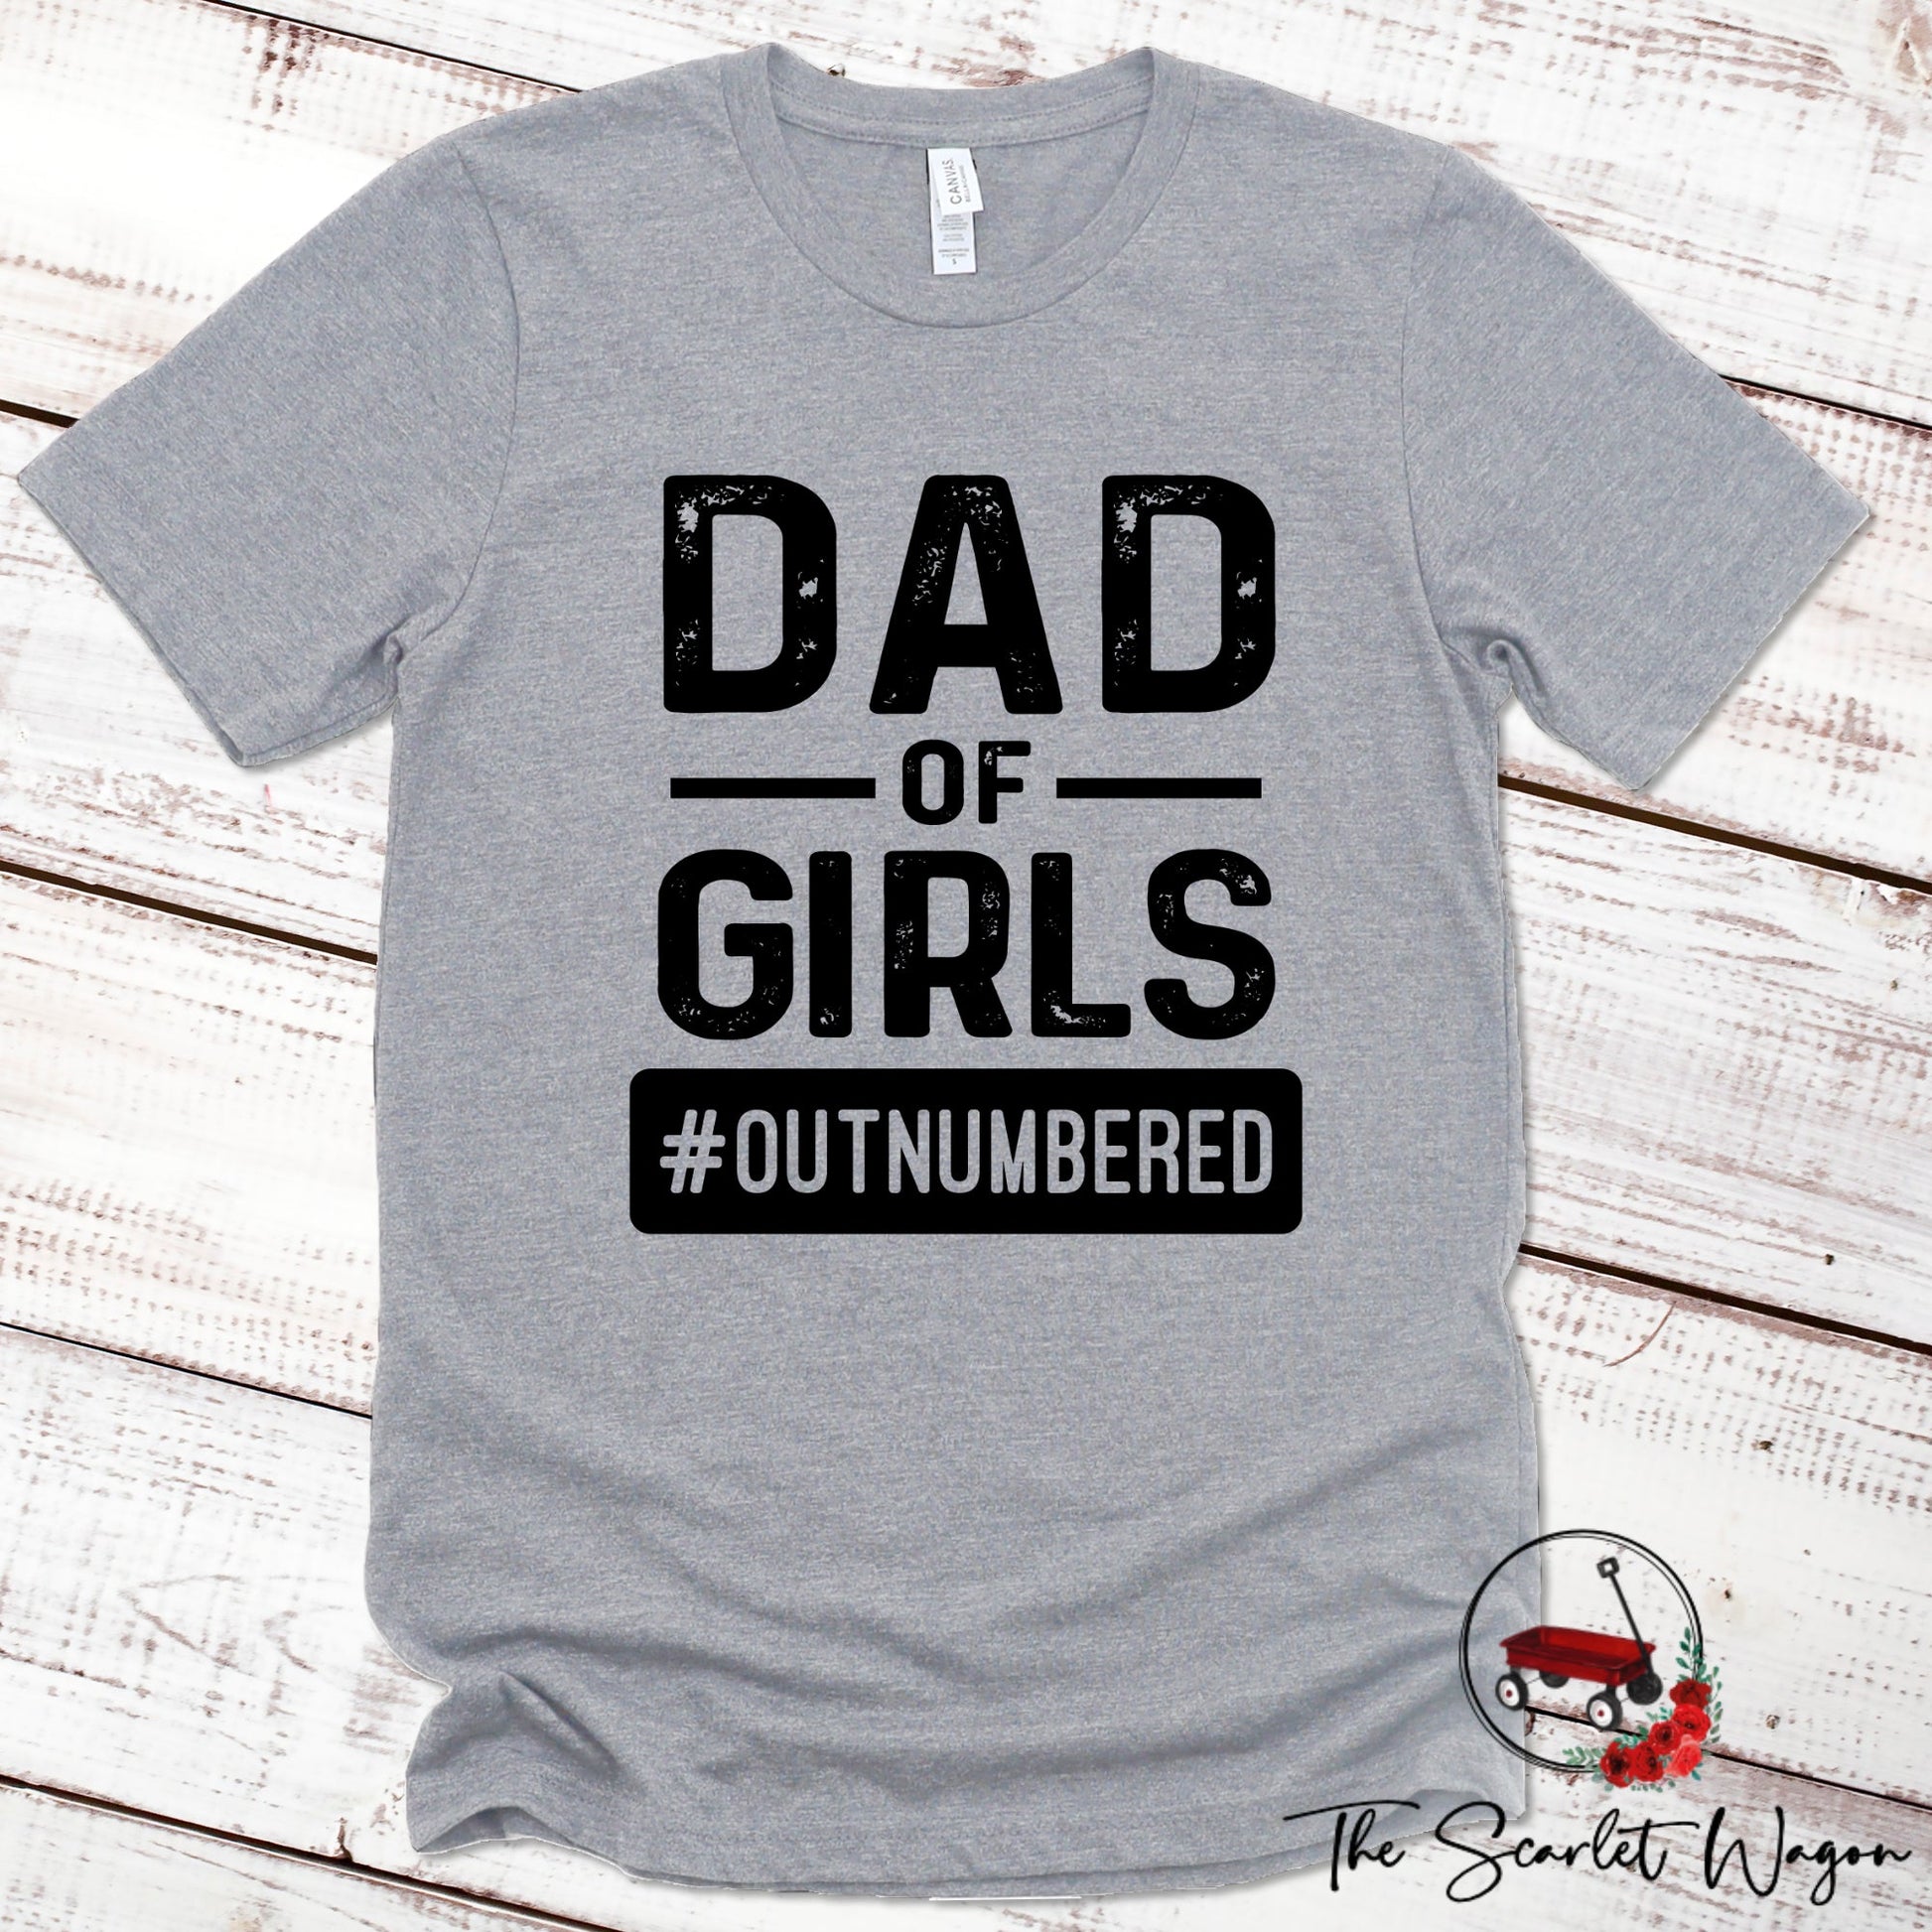 Dad of Girls #Outnumbered Premium Tee Scarlet Wagon Athletic Heather XS 